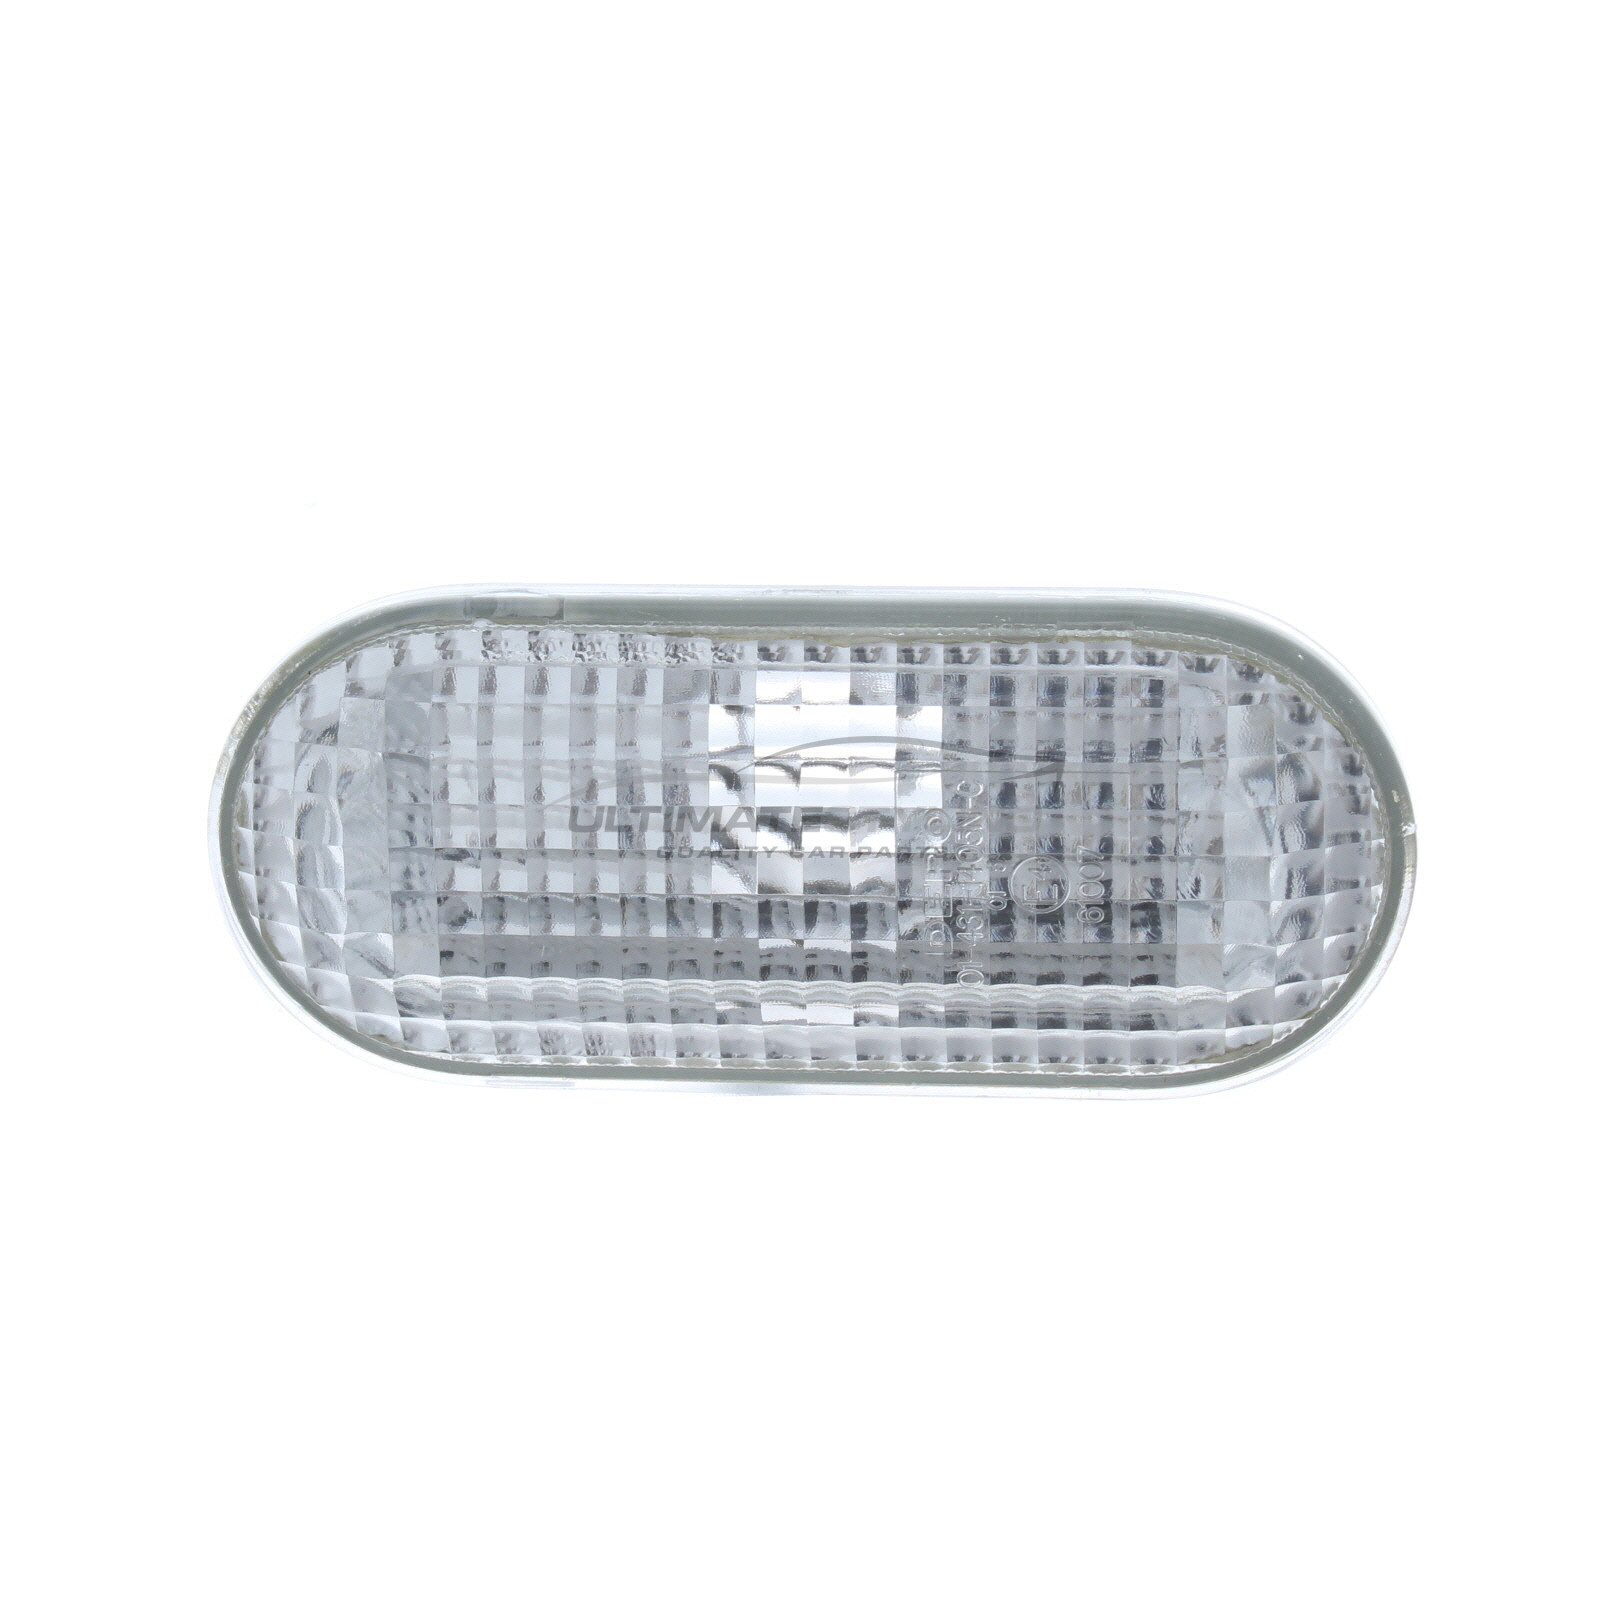 Ford C-MAX / Fiesta / Focus / Focus C-MAX / Fusion Side Repeater - Universal (LH or RH) - Clear lens - Non-LED